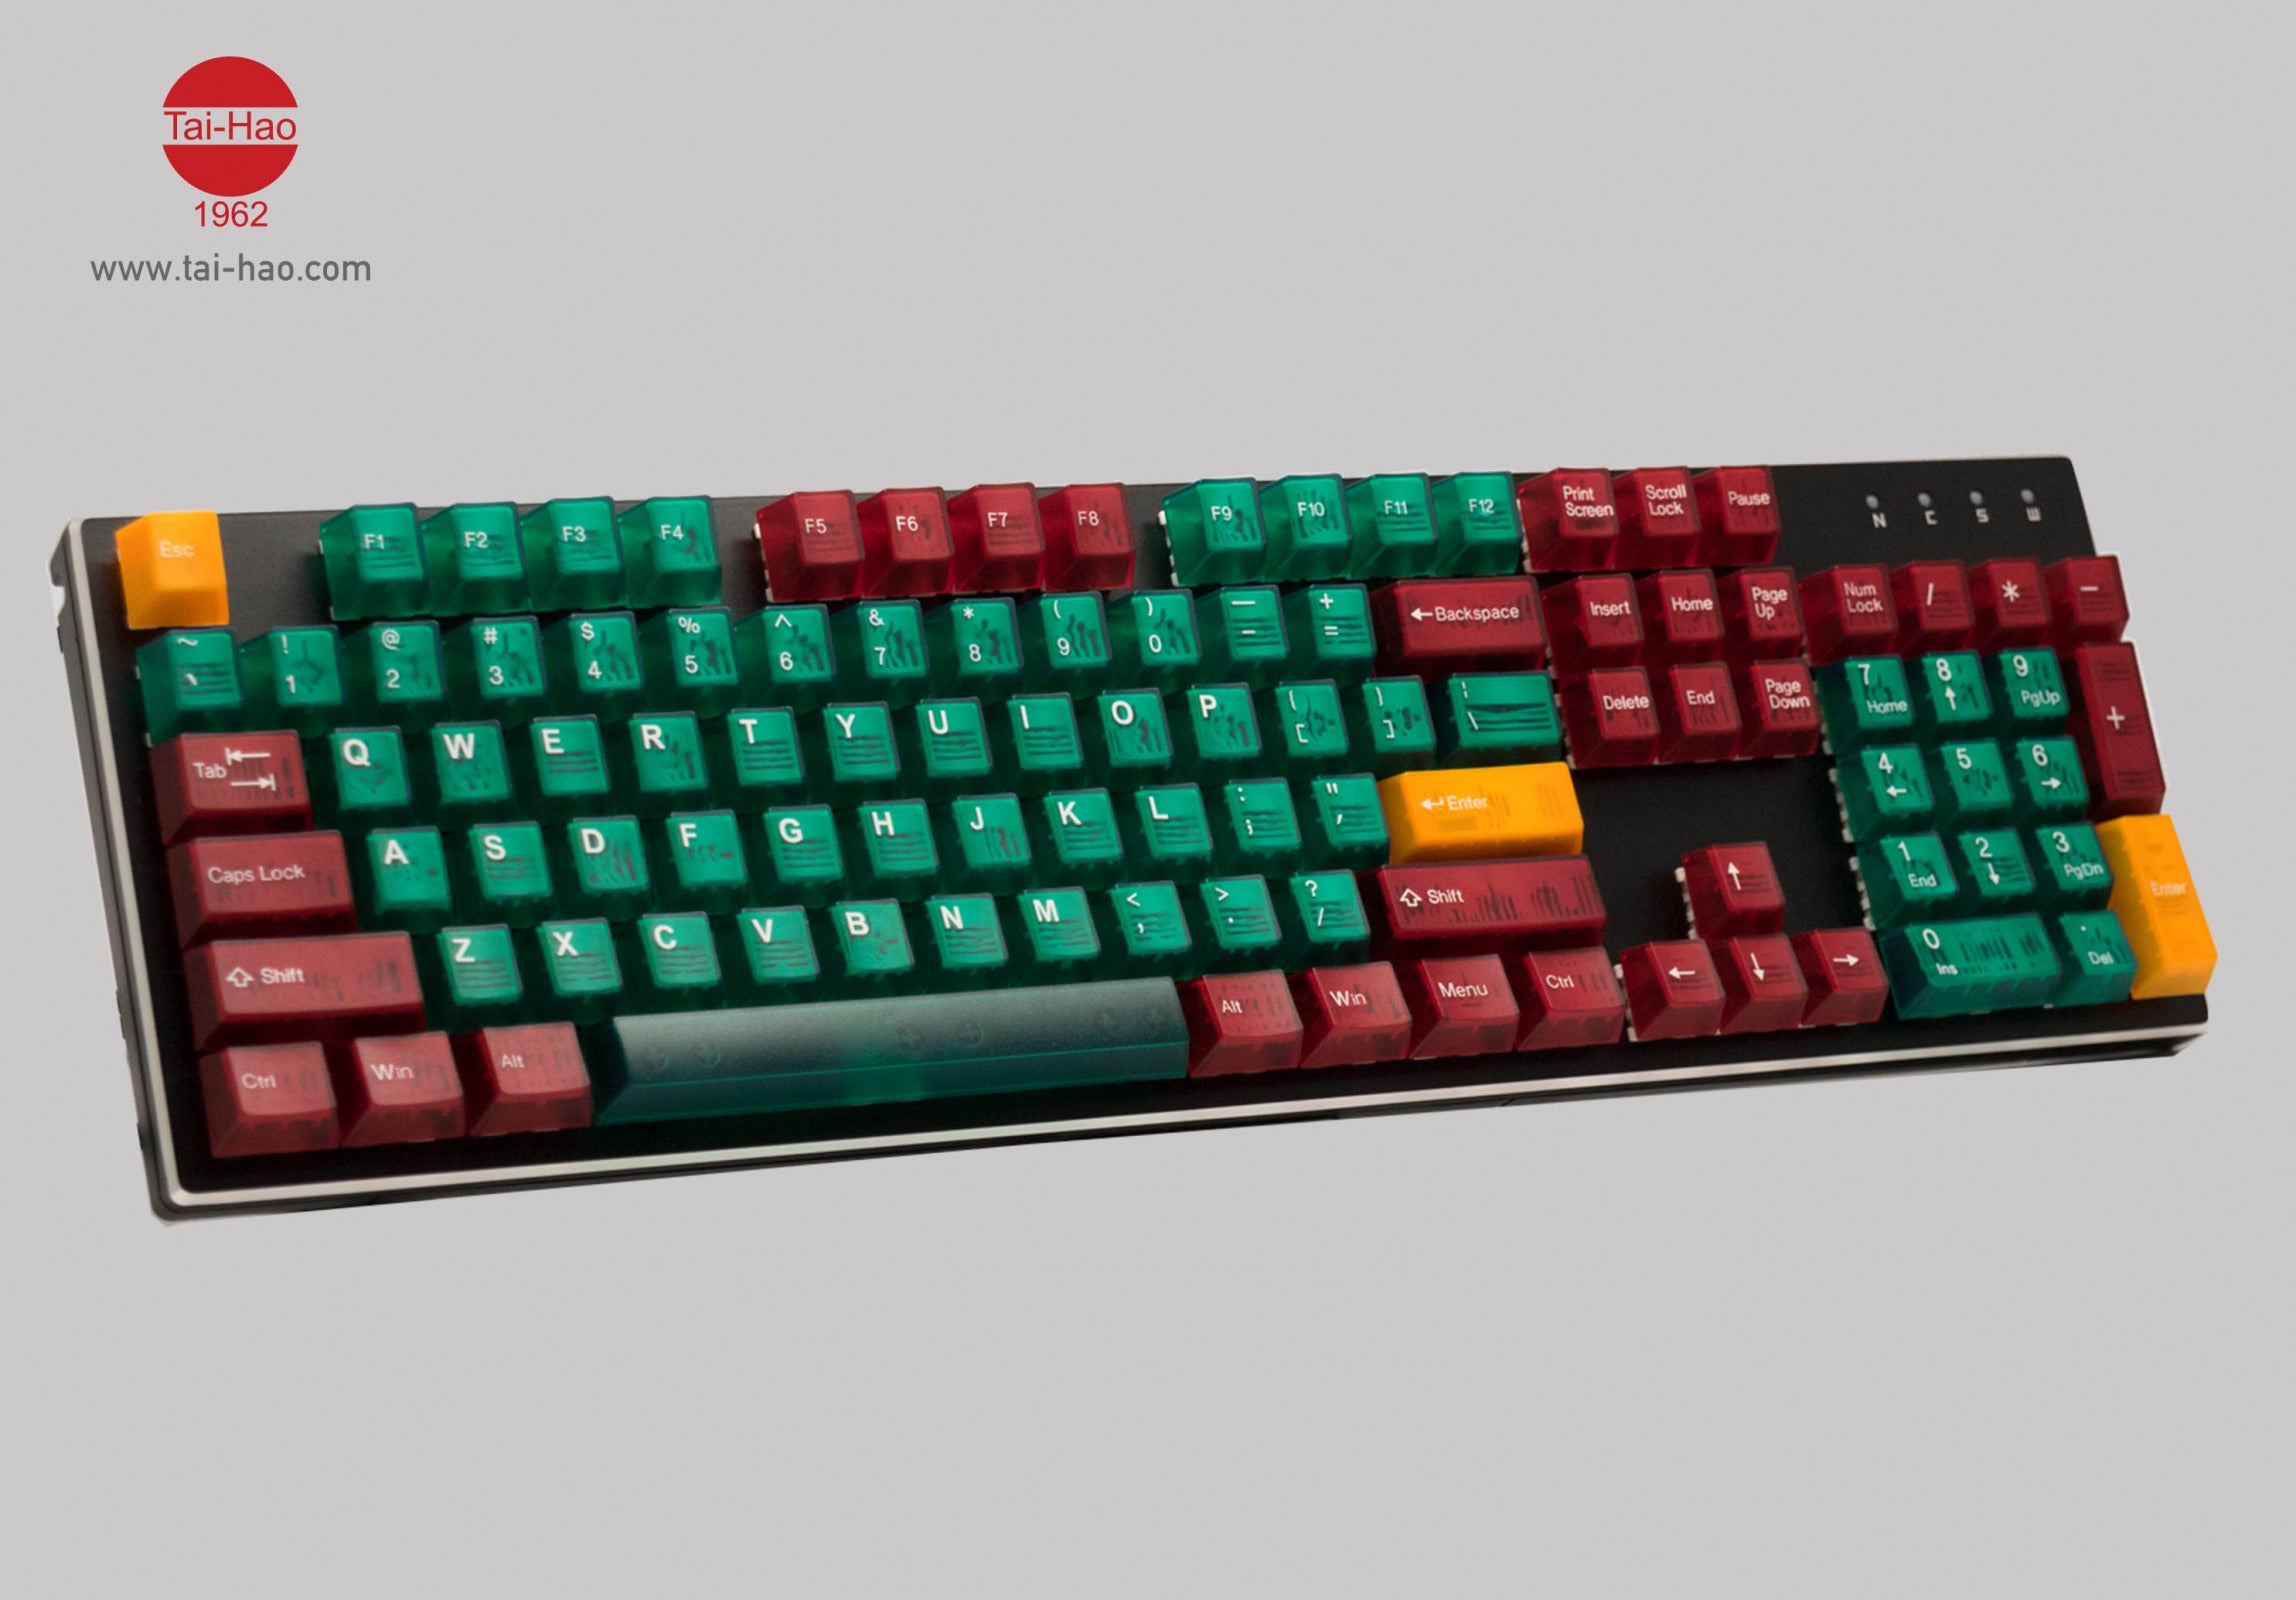 Tai-Hao 152 Key ABS Double Shot Cubic Keycap Set Translucent Green & Red MKZT1A09Y2 |0|